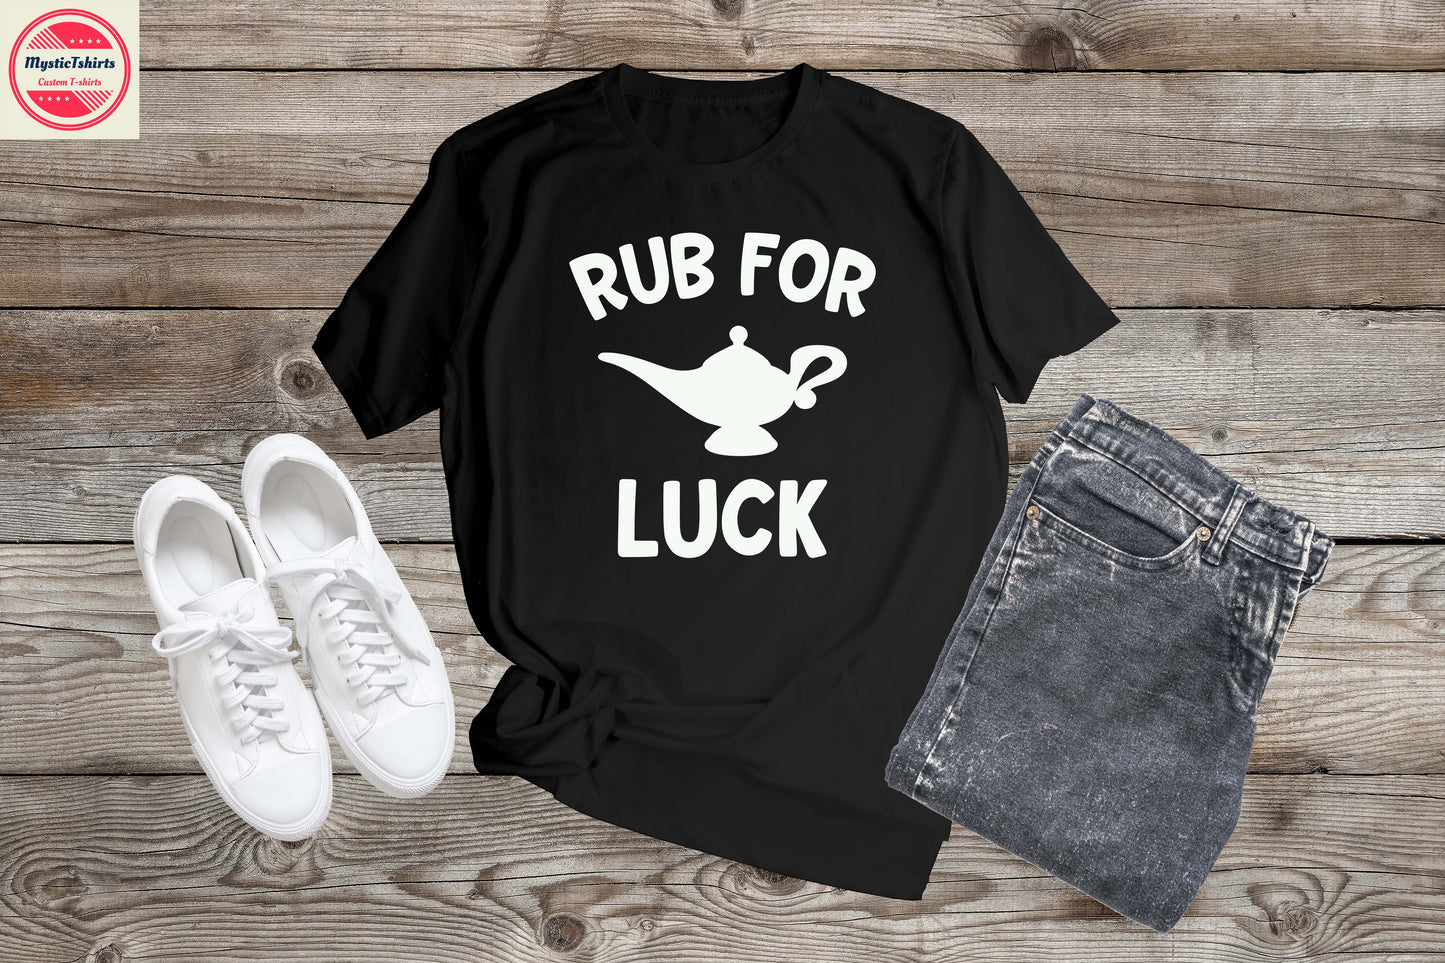 411. RUB FOR LUCK, Personalized T-Shirt, Custom Text, Make Your Own Shirt, Custom Tee